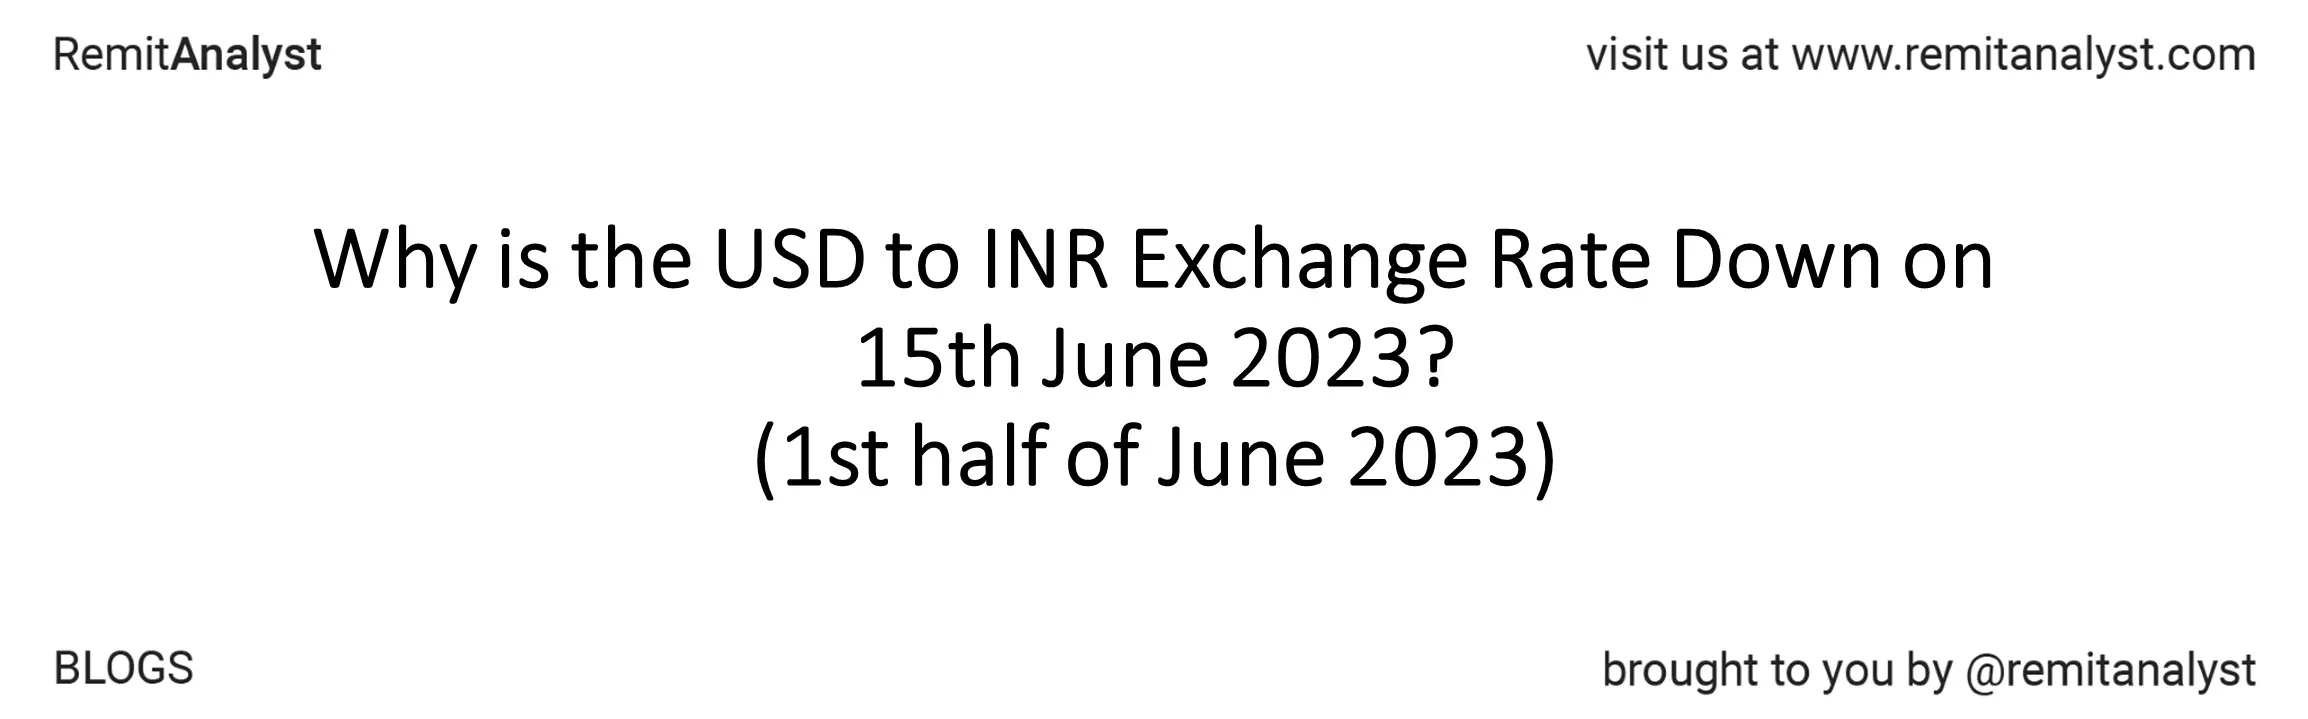 usd-to-inr-exchange-rate-1-june-2023-to-15-june-2023-title